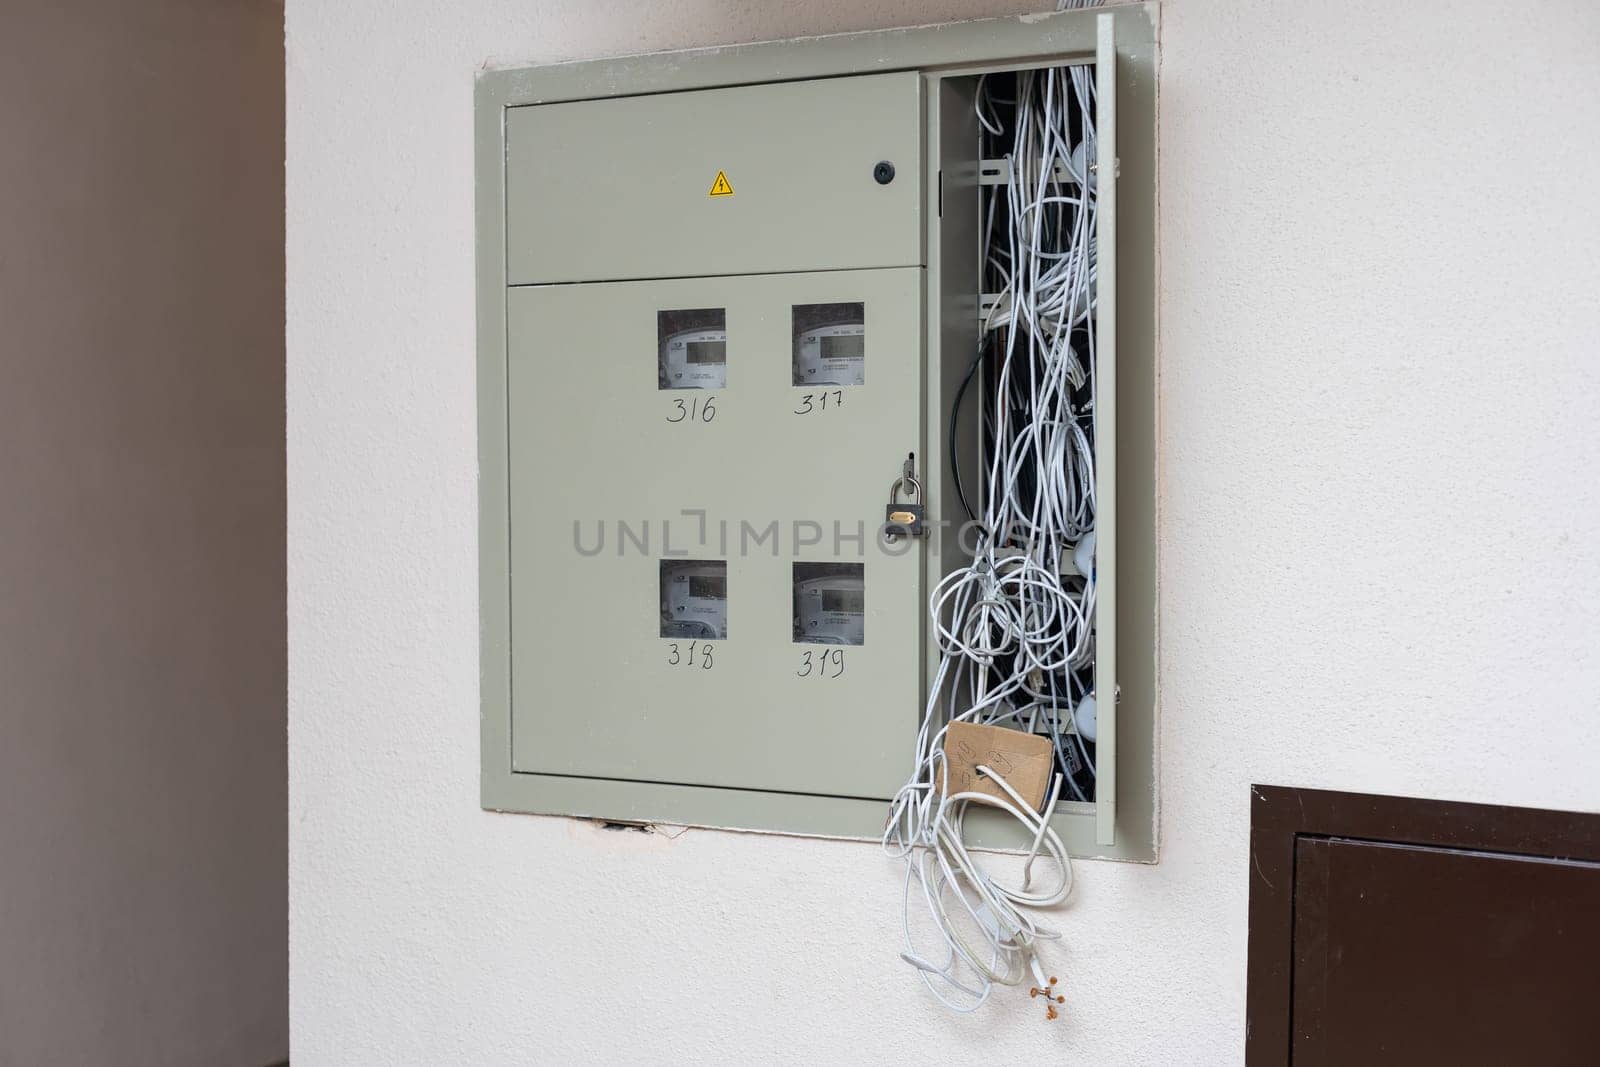 Electric cabinet with Internet and television cables in an apartment building. Niche for wires and cables inside the wall by Andelov13